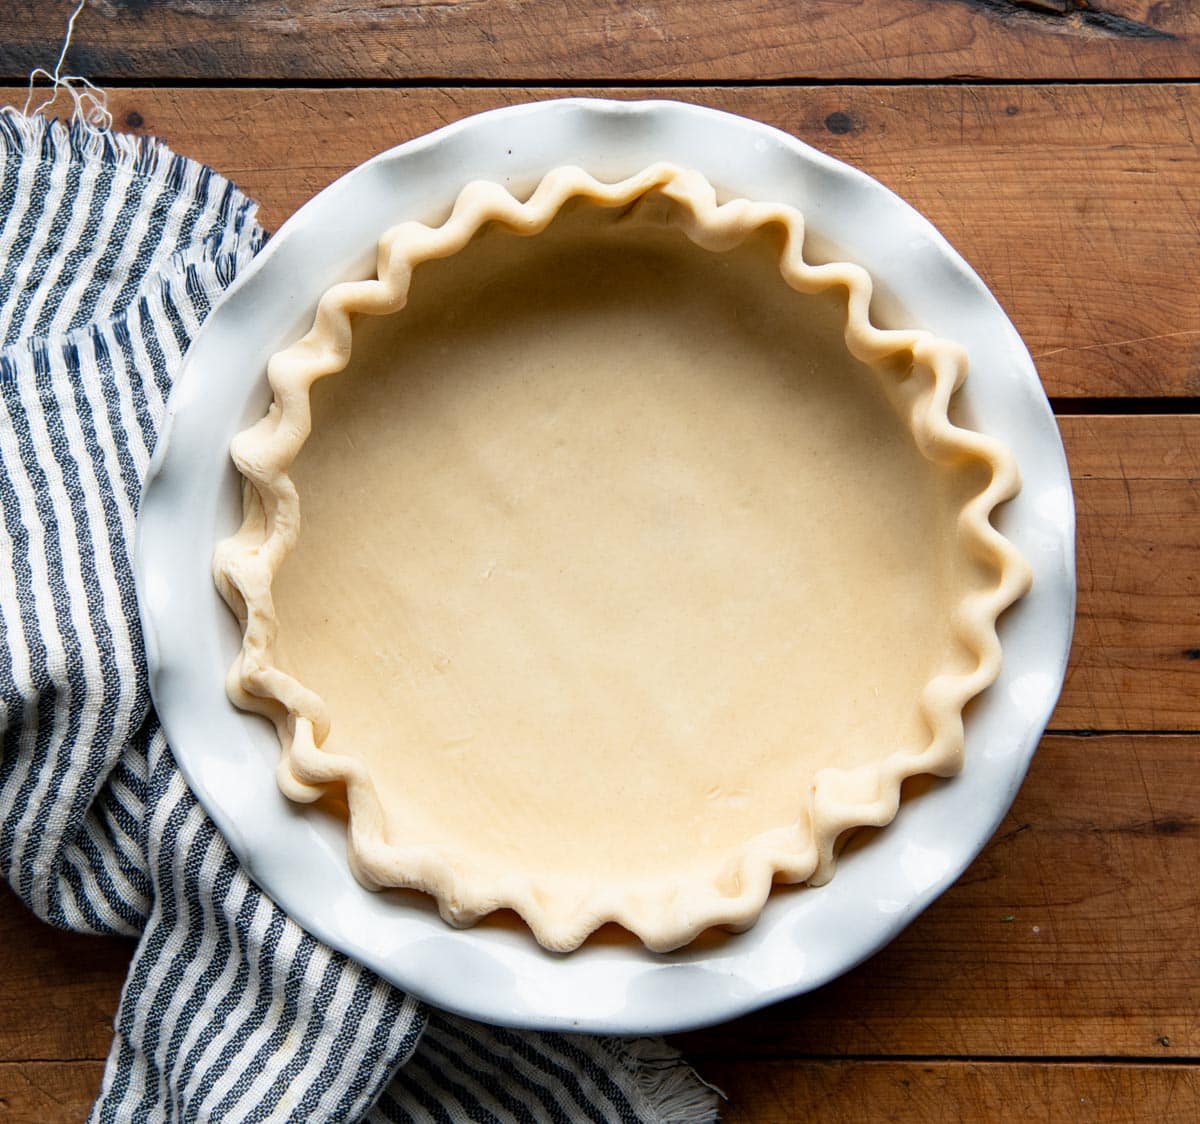 Unbaked pie crust in a white dish.